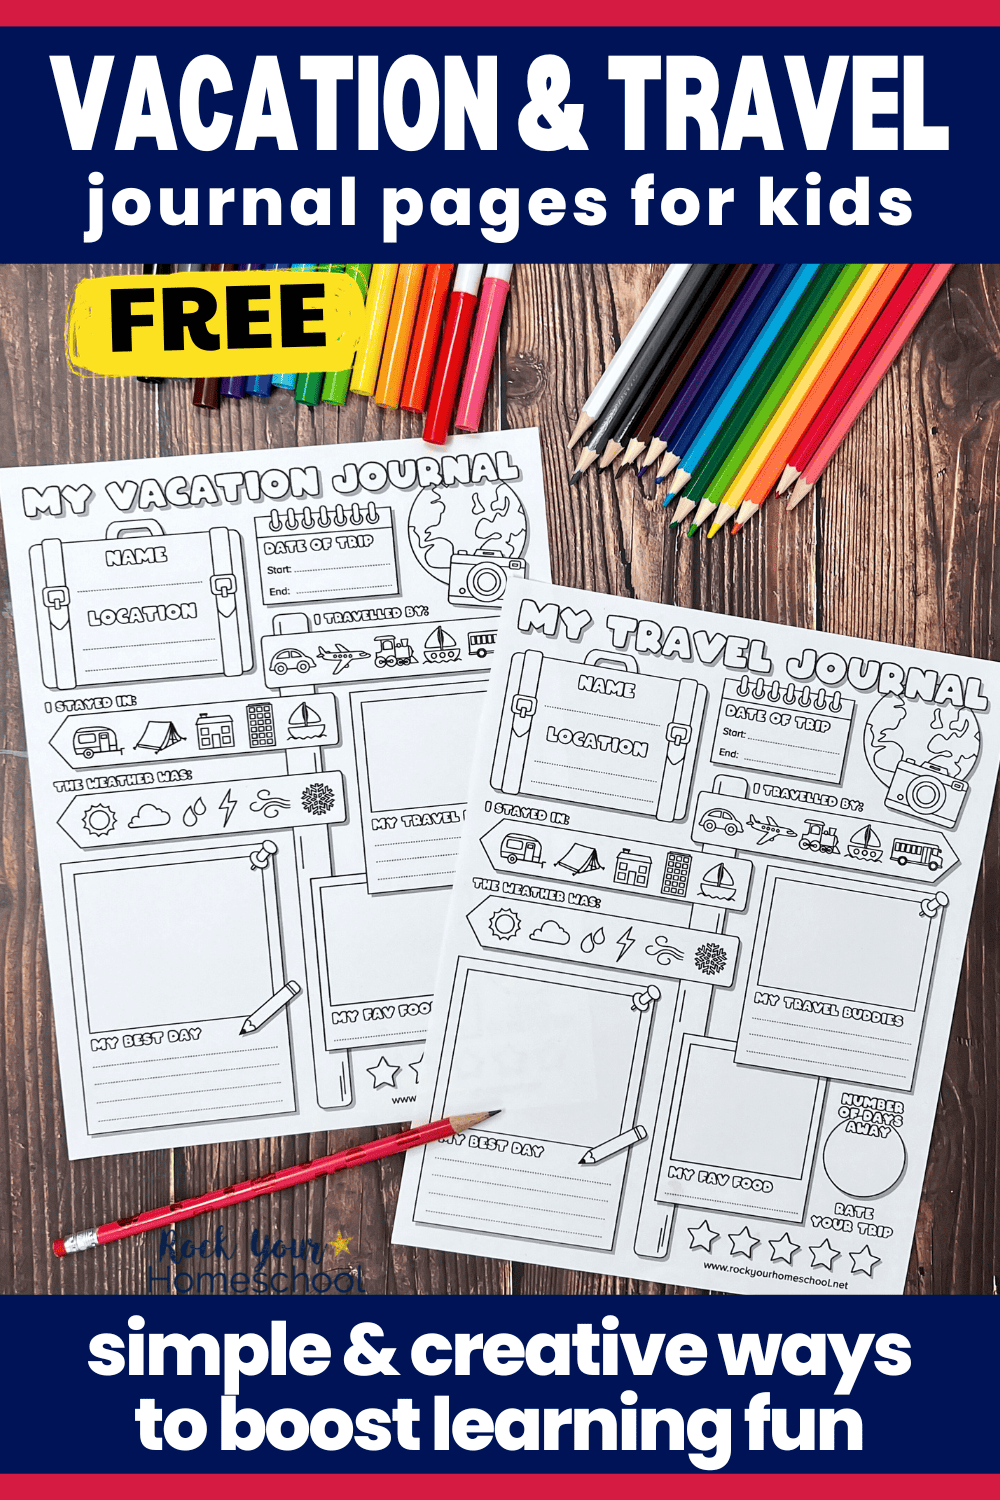 Examples of 2 free printable vacation and travel journal pages for kids with color pencils and markers.